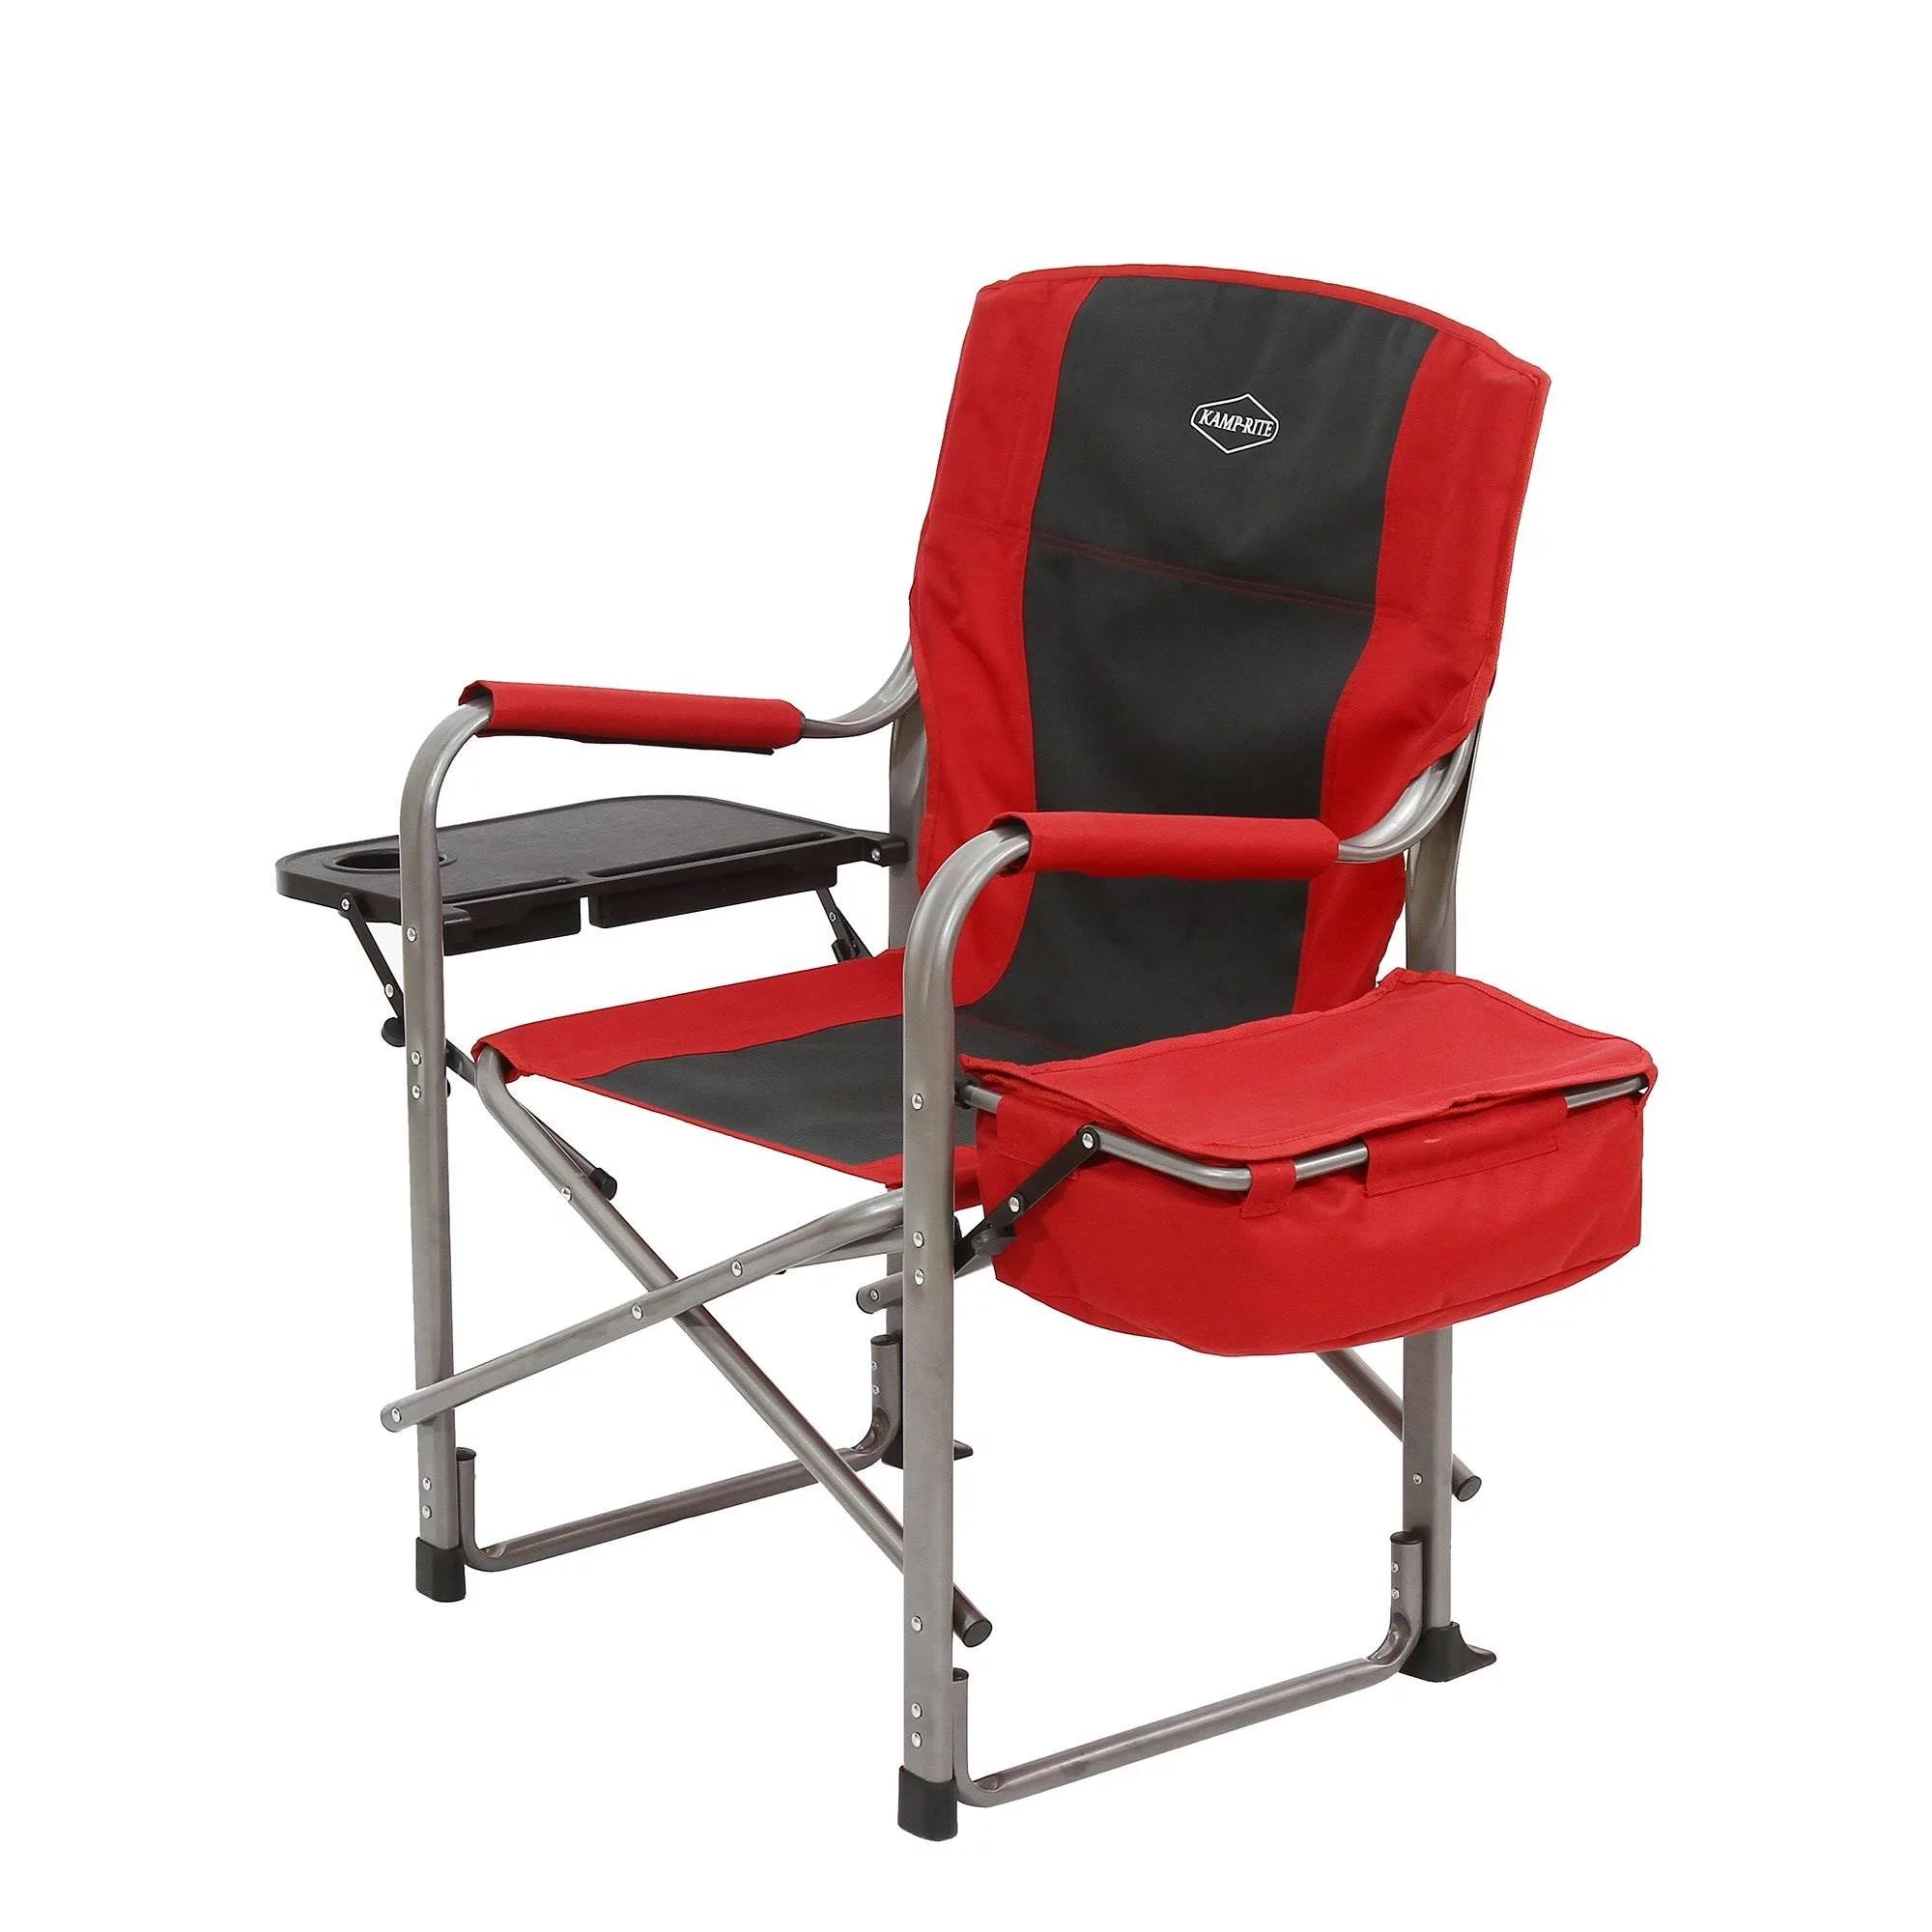 Kamp-Rite Outdoor Camp Folding Director's Chair with Side Table & Cooler, Red | Walmart (US)